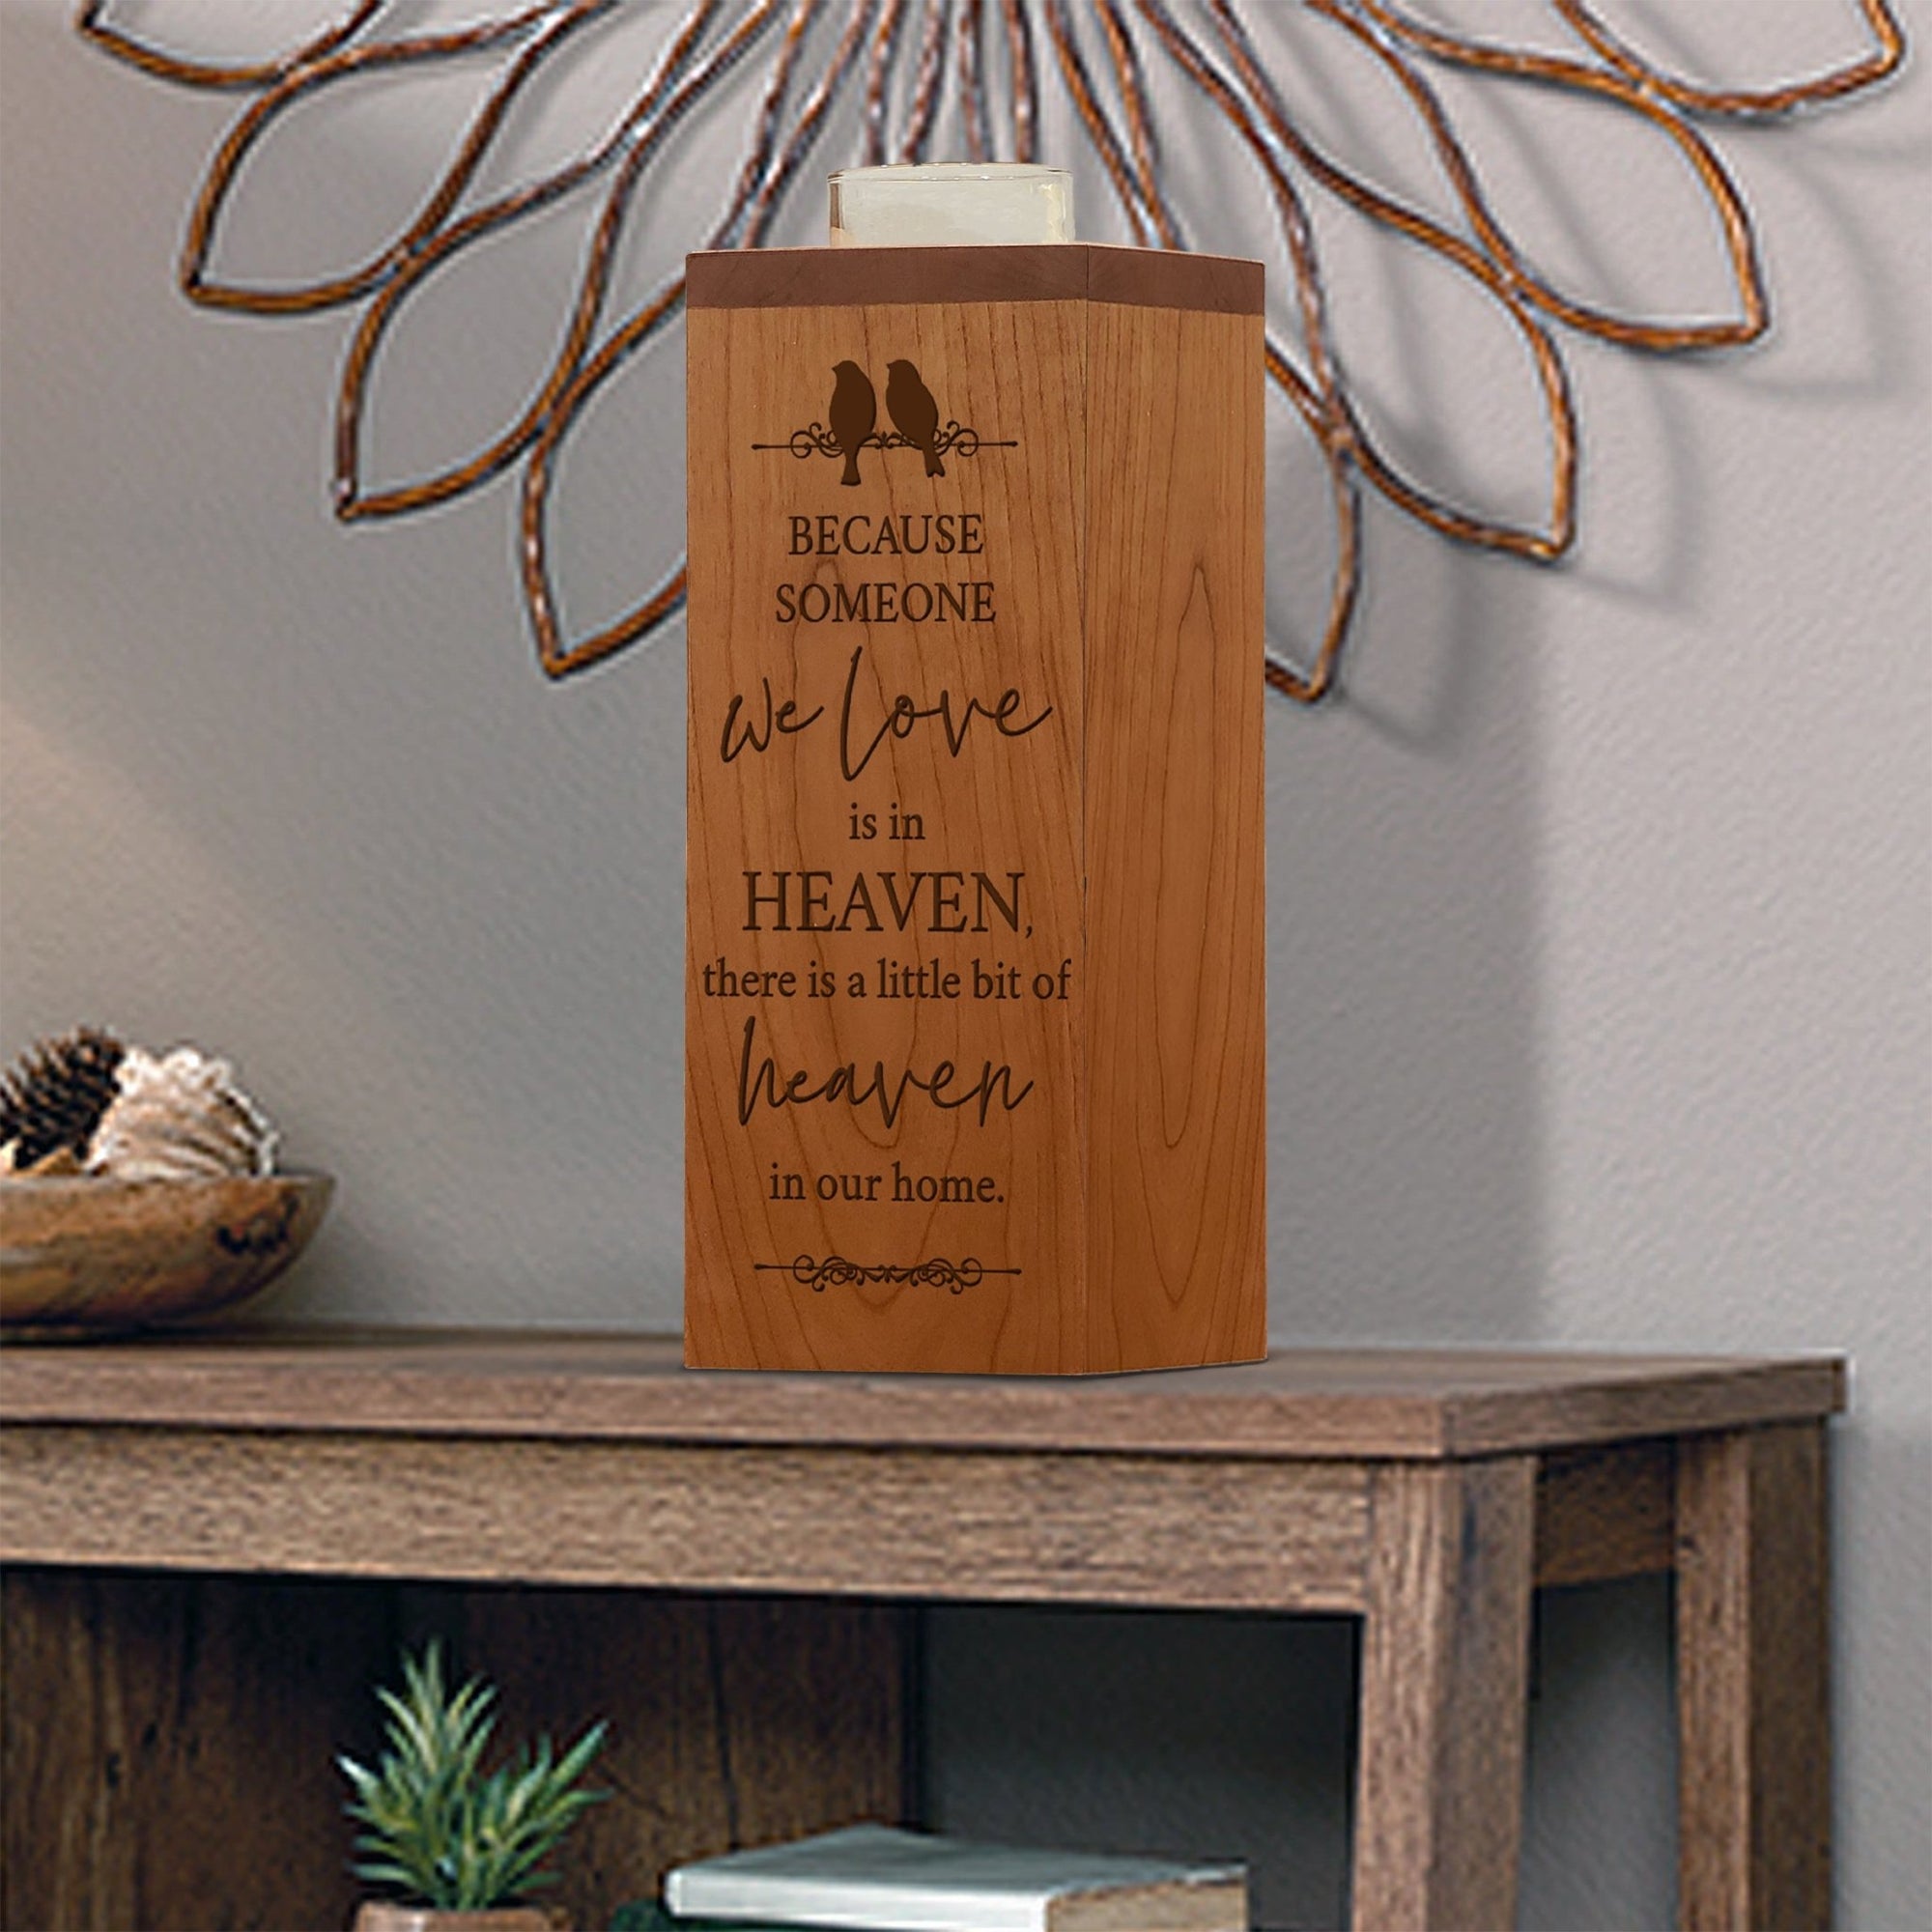 Cozy Cardinal Memorial Vertical Urns With Single Candle Holder For Human Ashes - Because Someone We Love - LifeSong Milestones